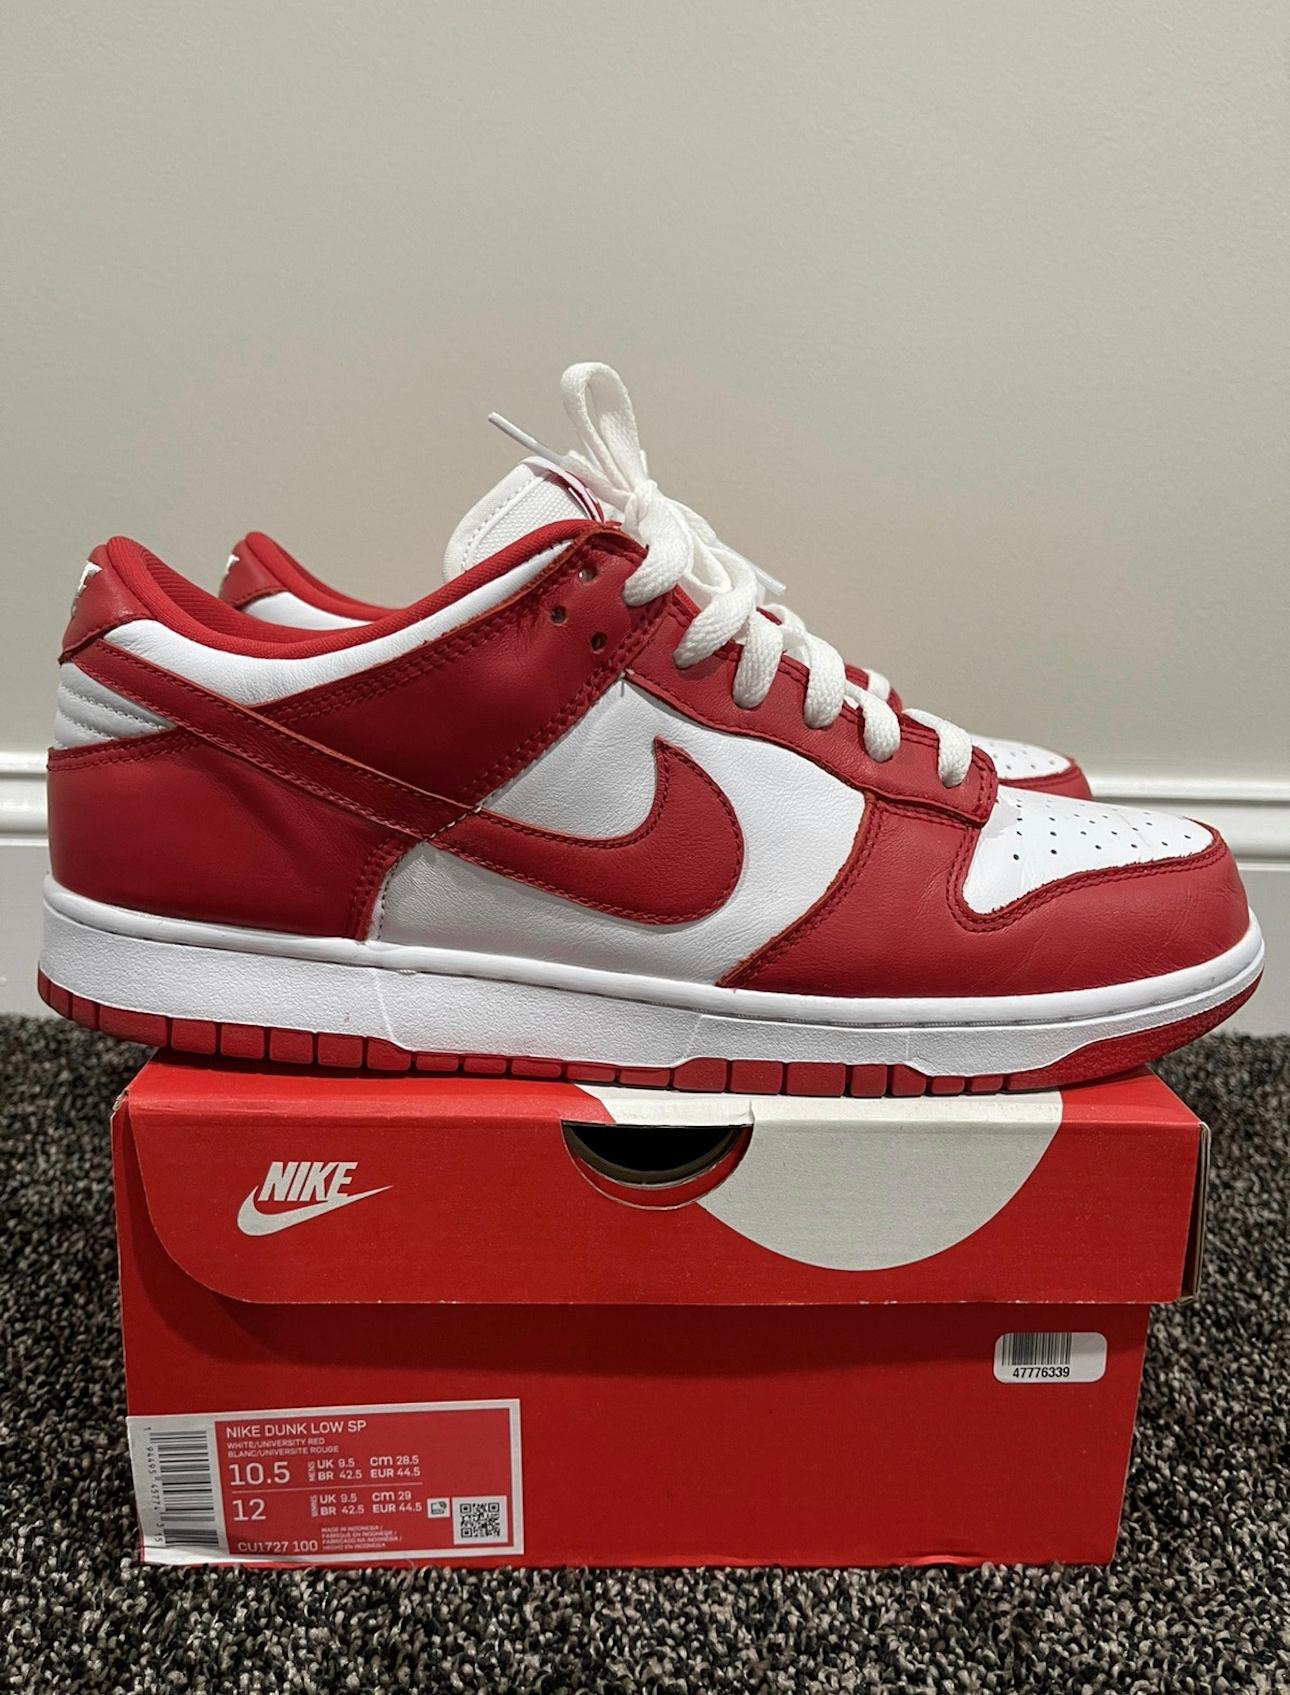 Brown Nike Dunk Low Retro SP “St. John’s” Red Varsity For Sale